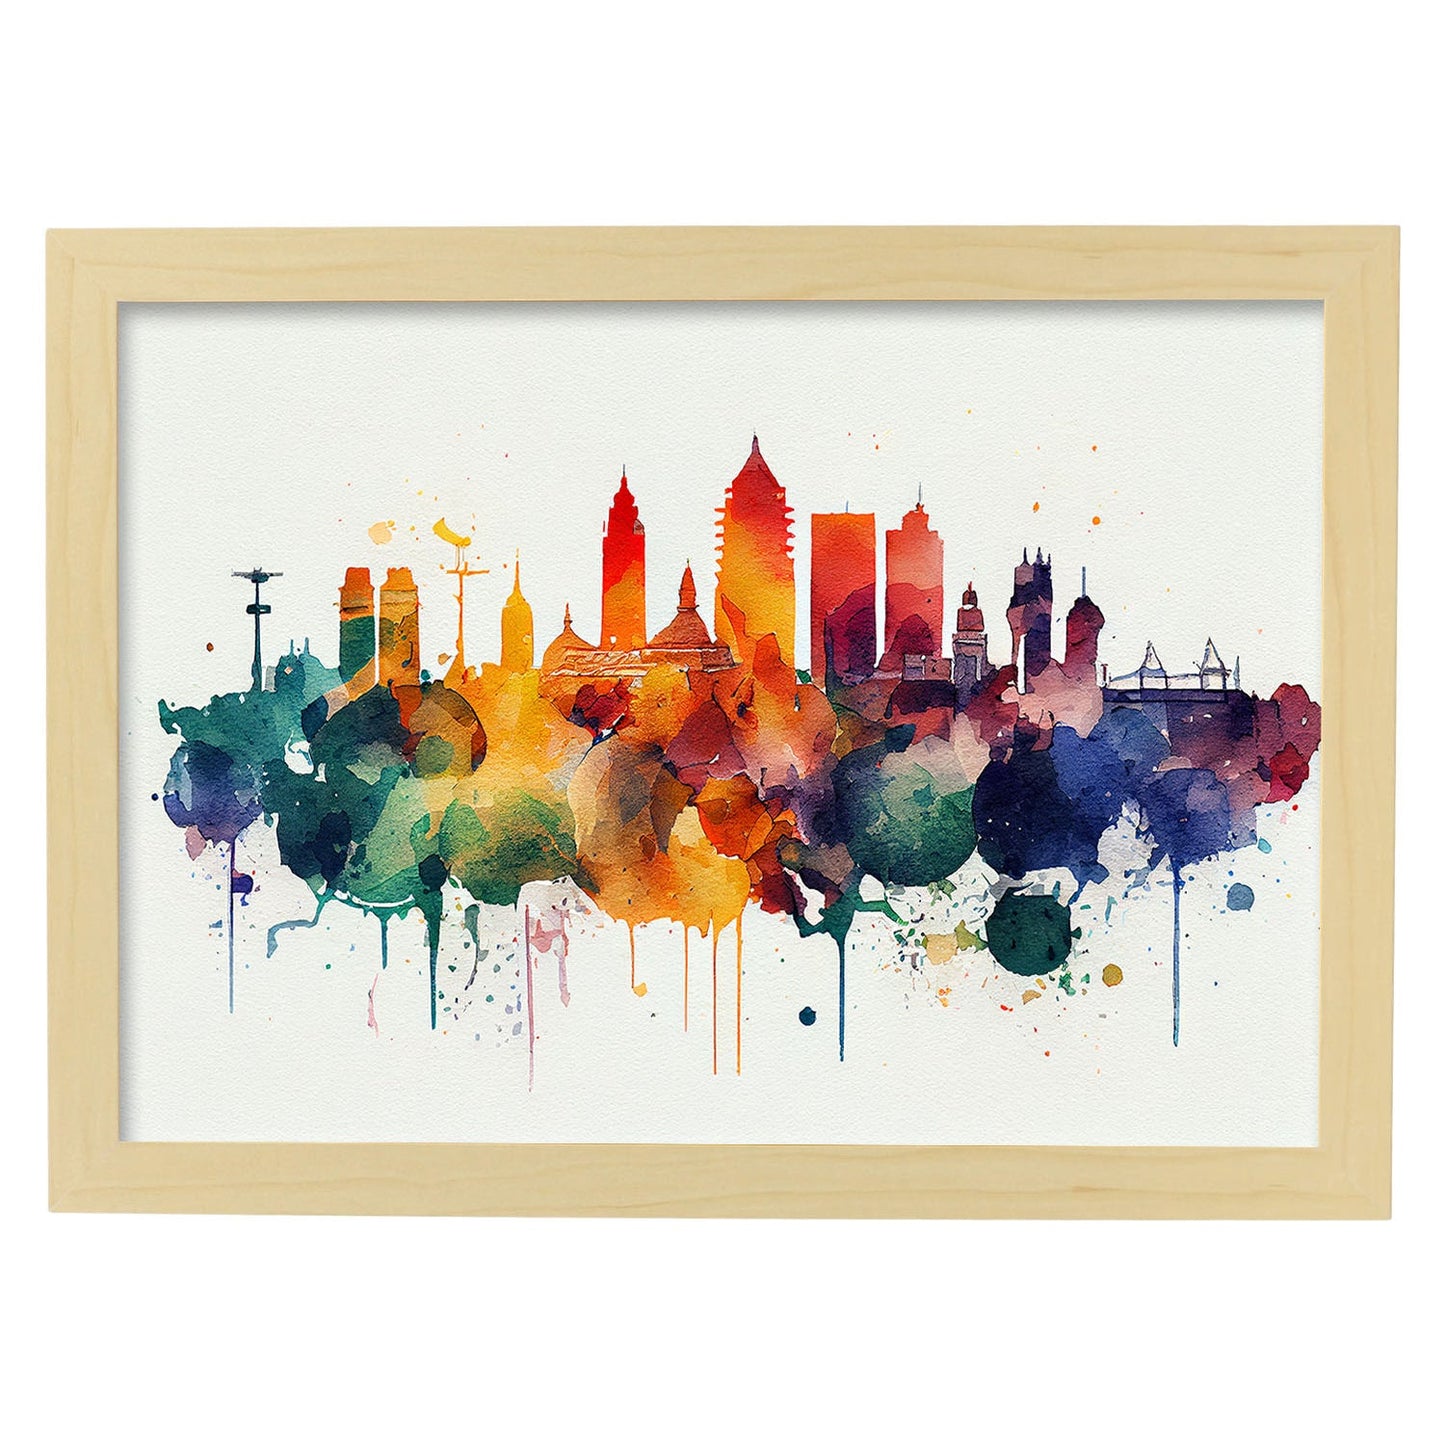 Nacnic watercolor of a skyline of the city of Madrid_1. Aesthetic Wall Art Prints for Bedroom or Living Room Design.-Artwork-Nacnic-A4-Marco Madera Clara-Nacnic Estudio SL